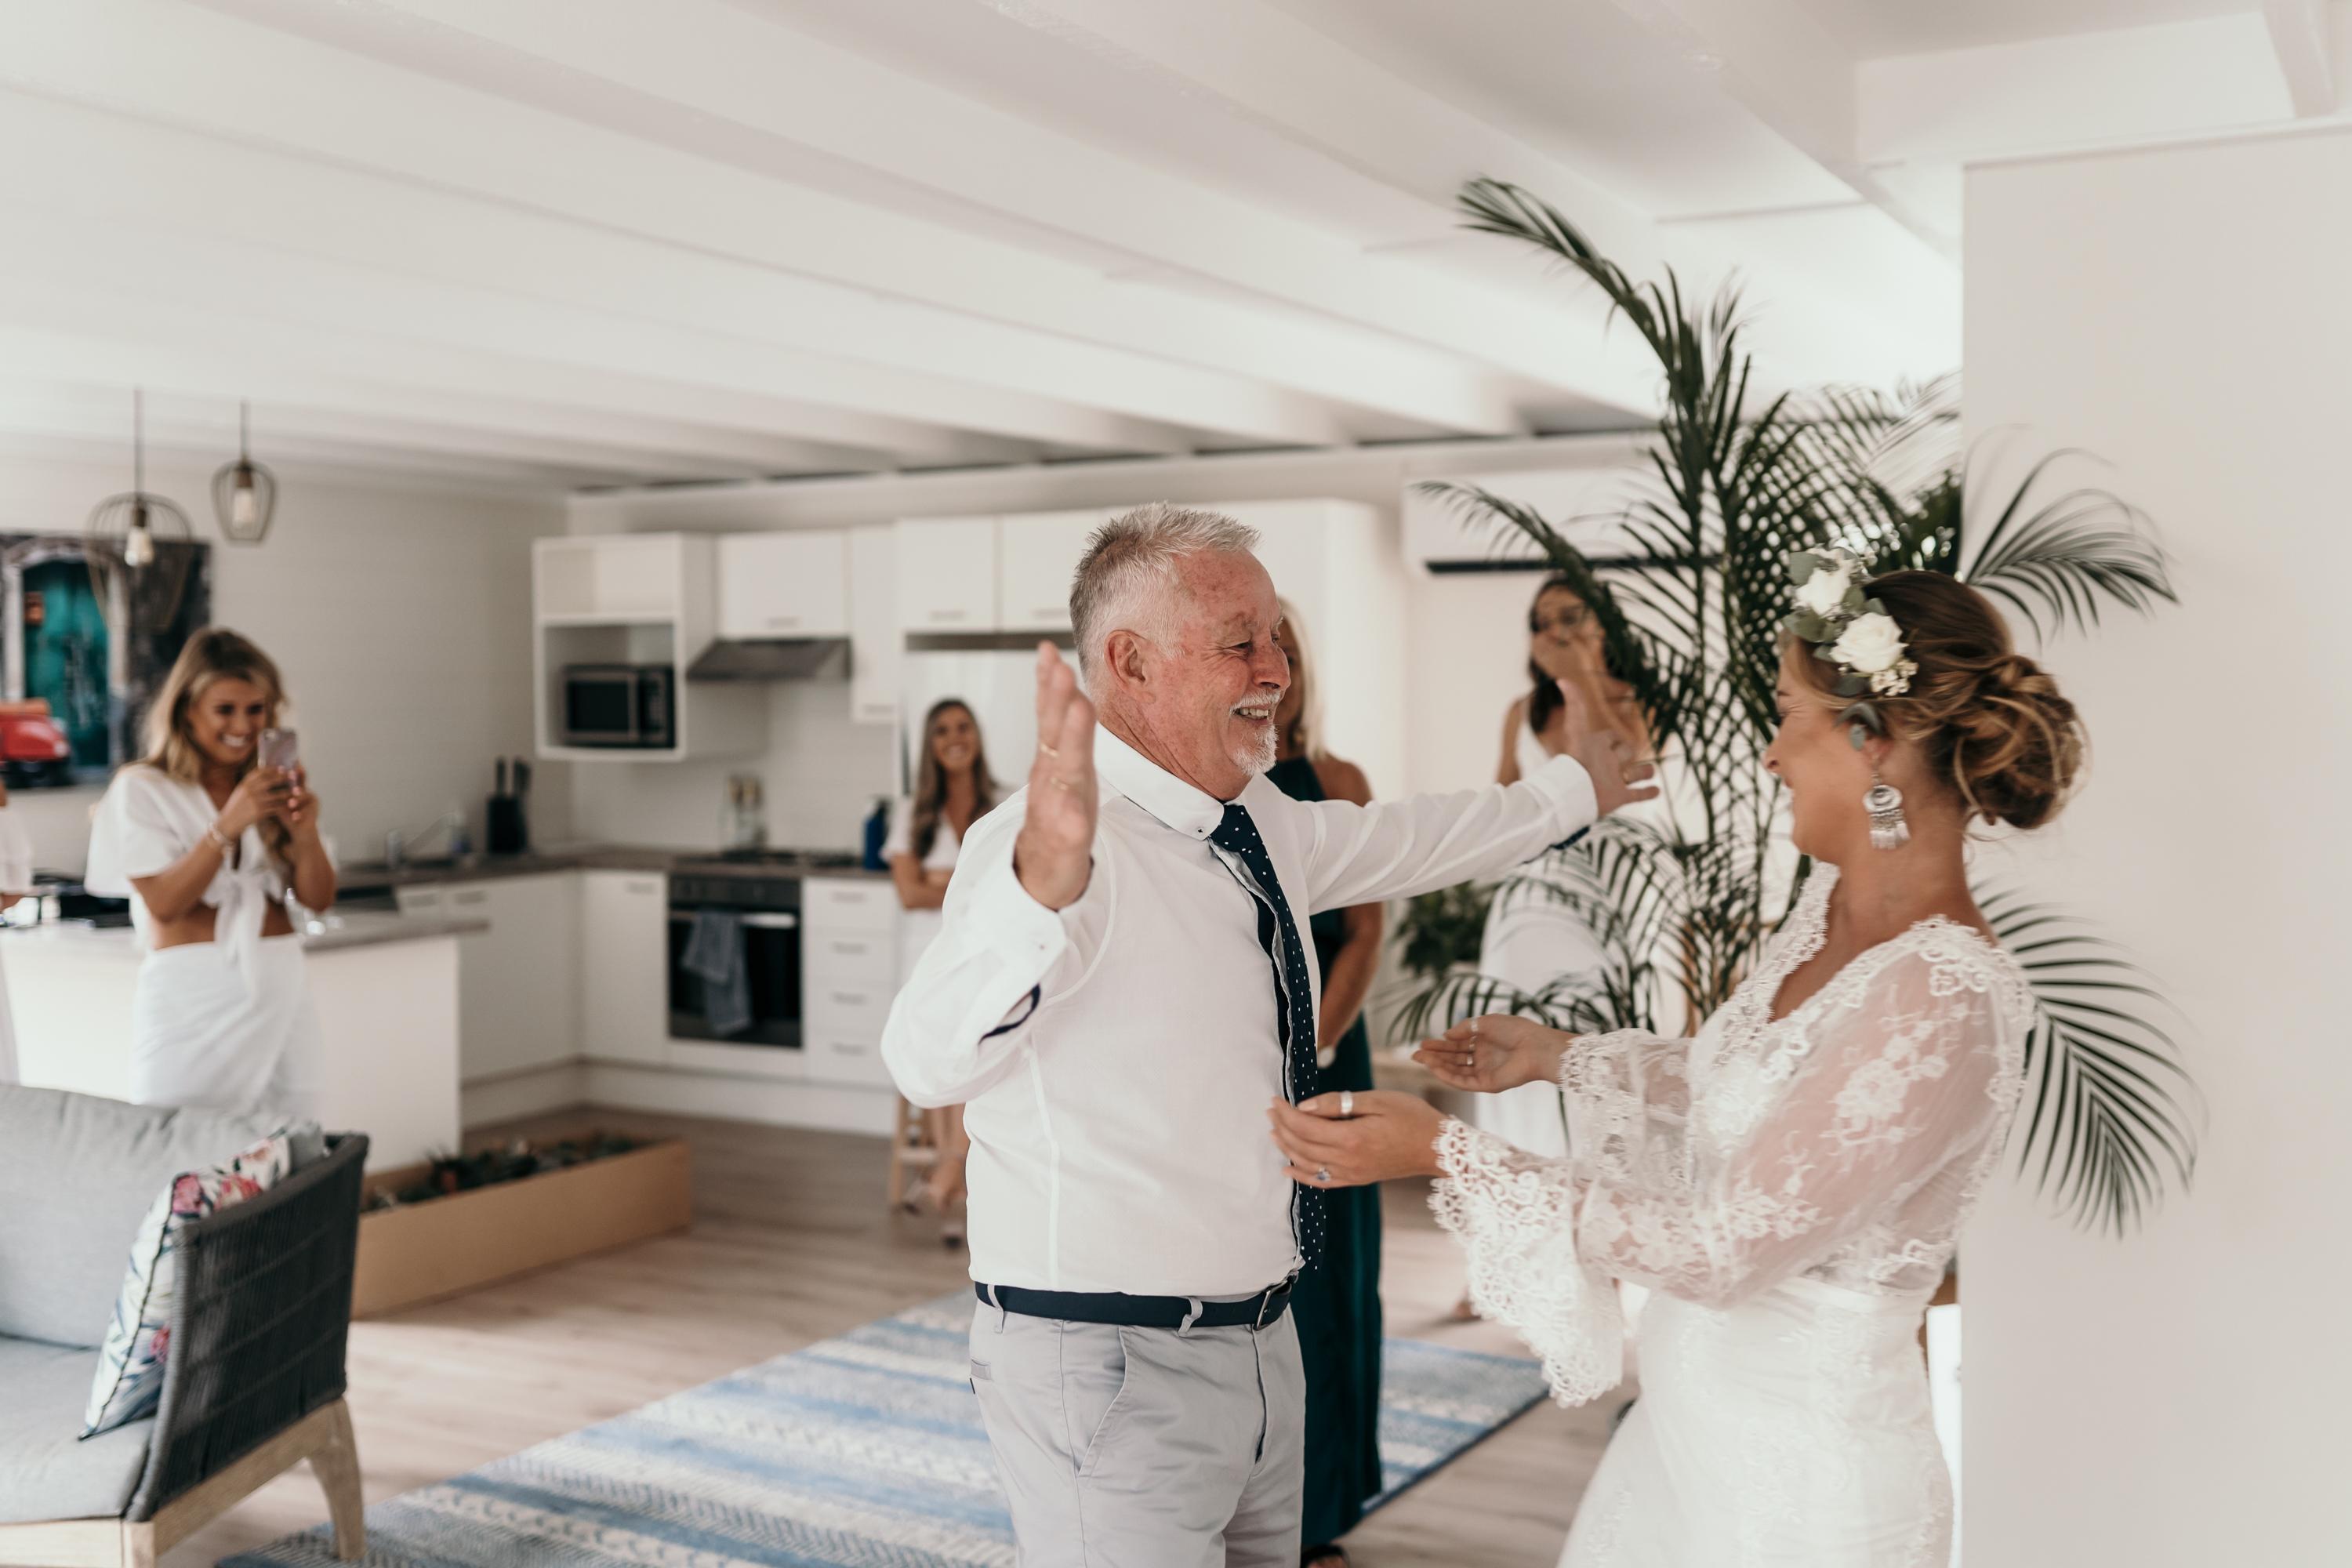 Dad seeing daughter for the first time at wedding